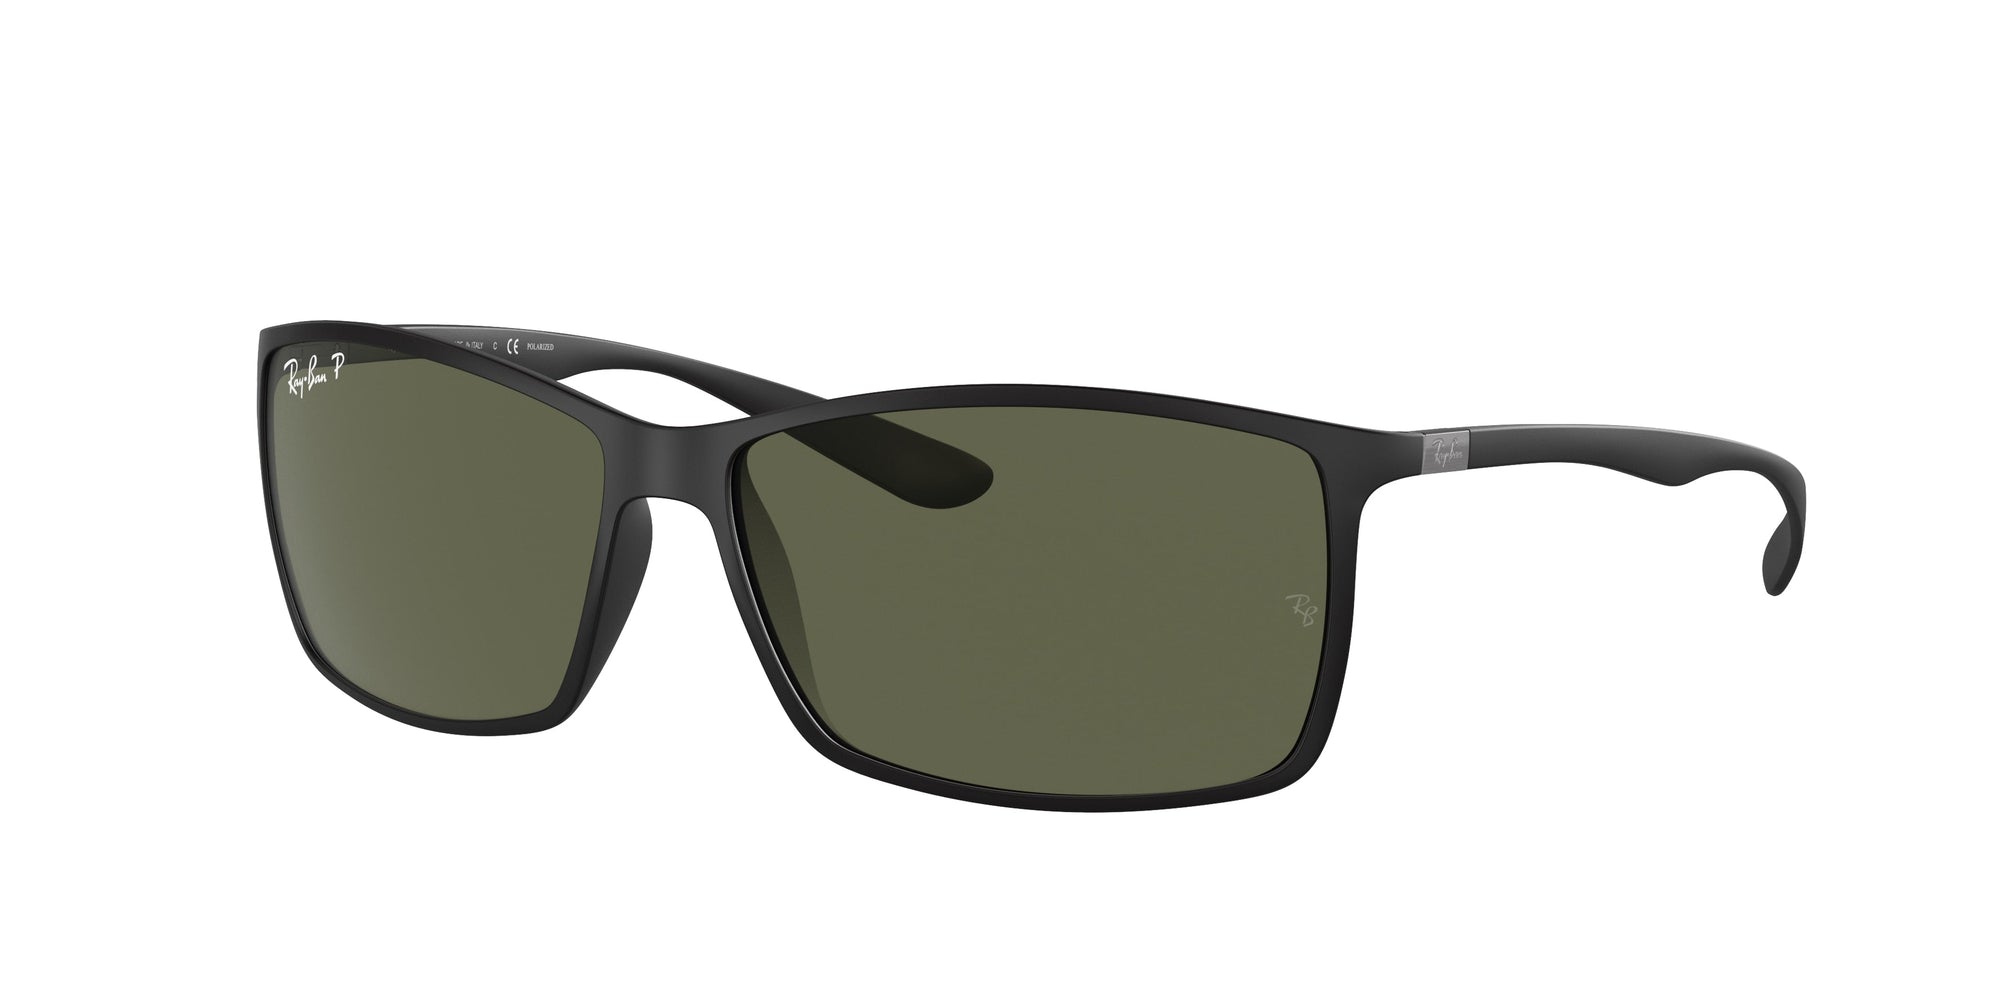 RAY-BAN LITEFORCE RB4179